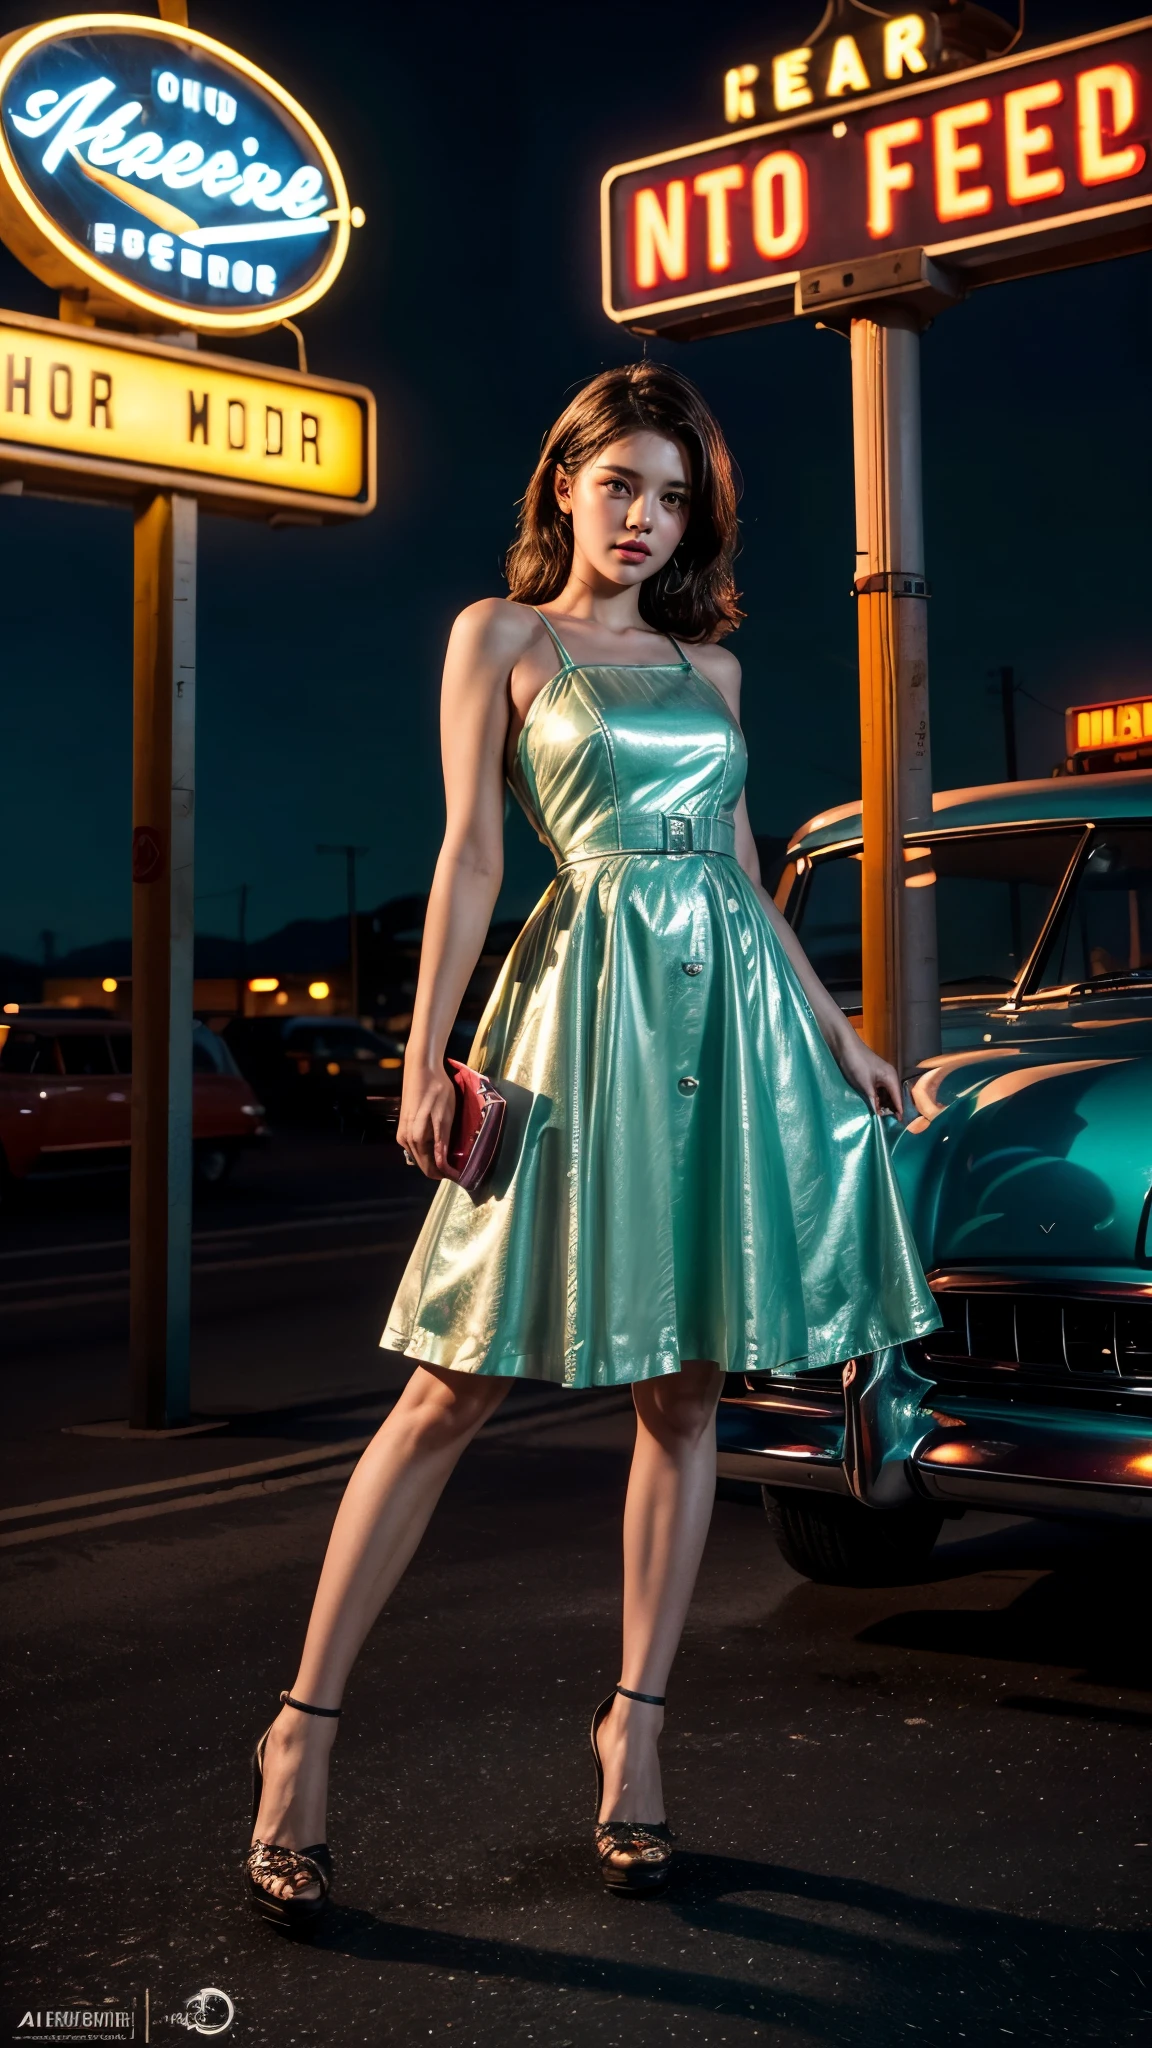 ((masterpiece, highest quality, Highest image quality, High resolution, photorealistic, Raw photo, 8K)), arafed view of a motel with a car parked in front of it, with neon signs, A woman waiting for a guest in front of a motel, seduction, short dress and high heels, route 6 6, neon signs, 1 9 5 0 s americana tourism, some have neon signs, neon lights outside, neon advertisements, gigantic neon signs, neon shops, by Arnie Swekel, few neon signs, neon signs in background, (Just 1 meter away from Picture Taken), k, (upper body shot), Ray Tracing CG Unity 8k walpaper, (Detailed Dress), (Detailed body), (detailed skin), 